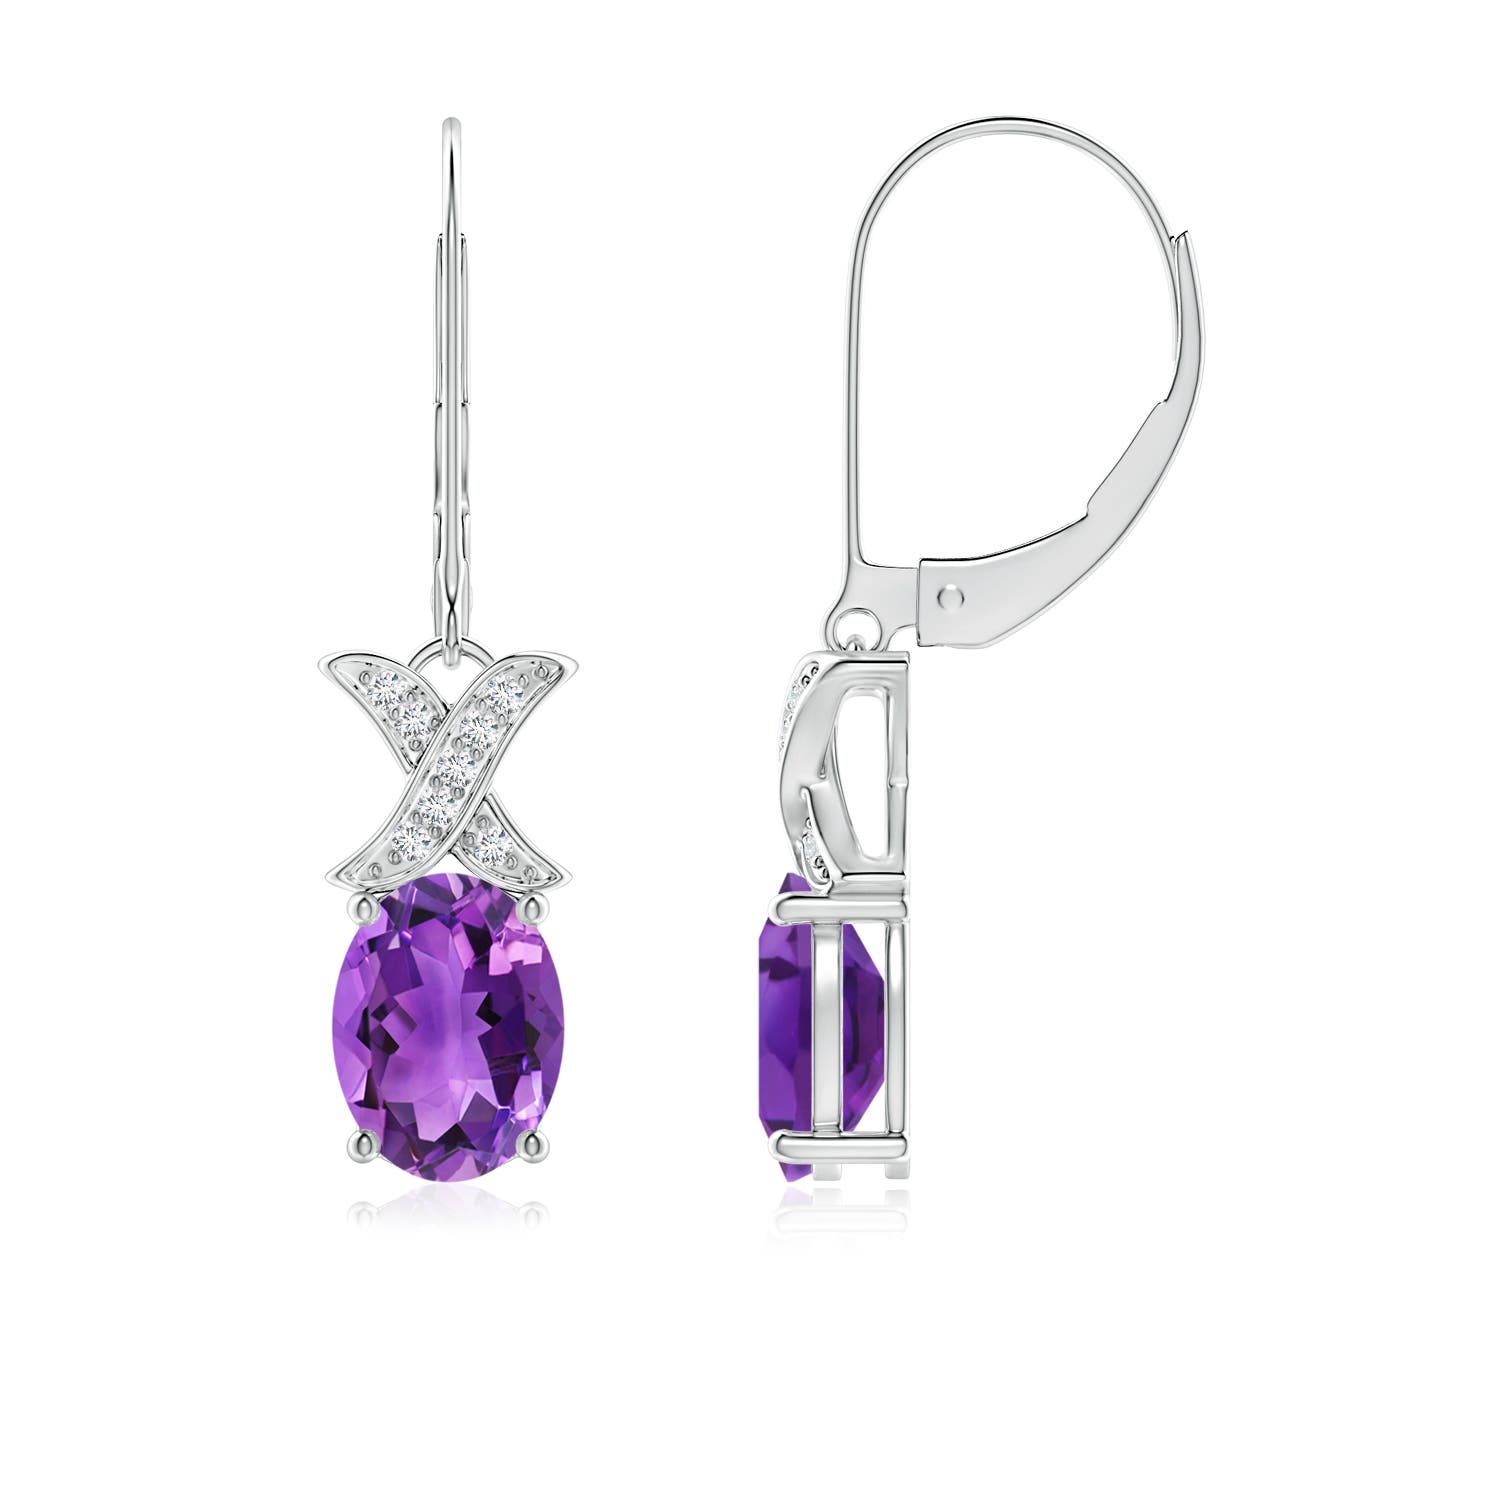 AAA - Amethyst / 2.38 CT / 14 KT White Gold